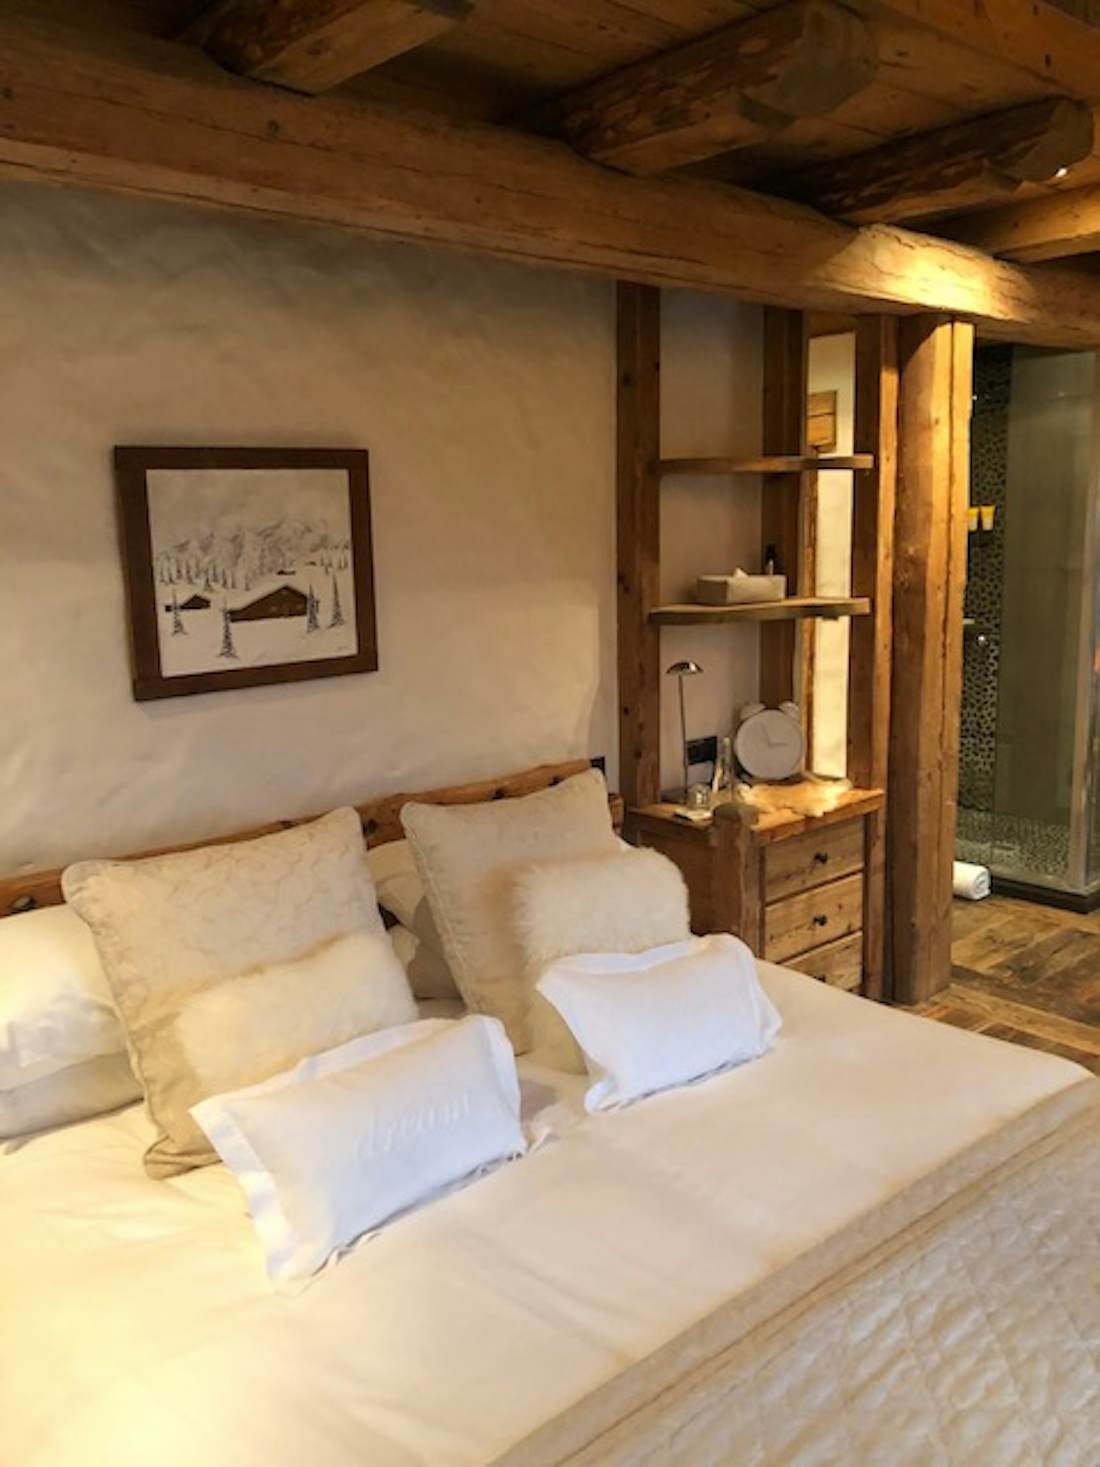 Accommodation - Megeve - Chalet Dabema - Bedrooms 4-5 - 4/4